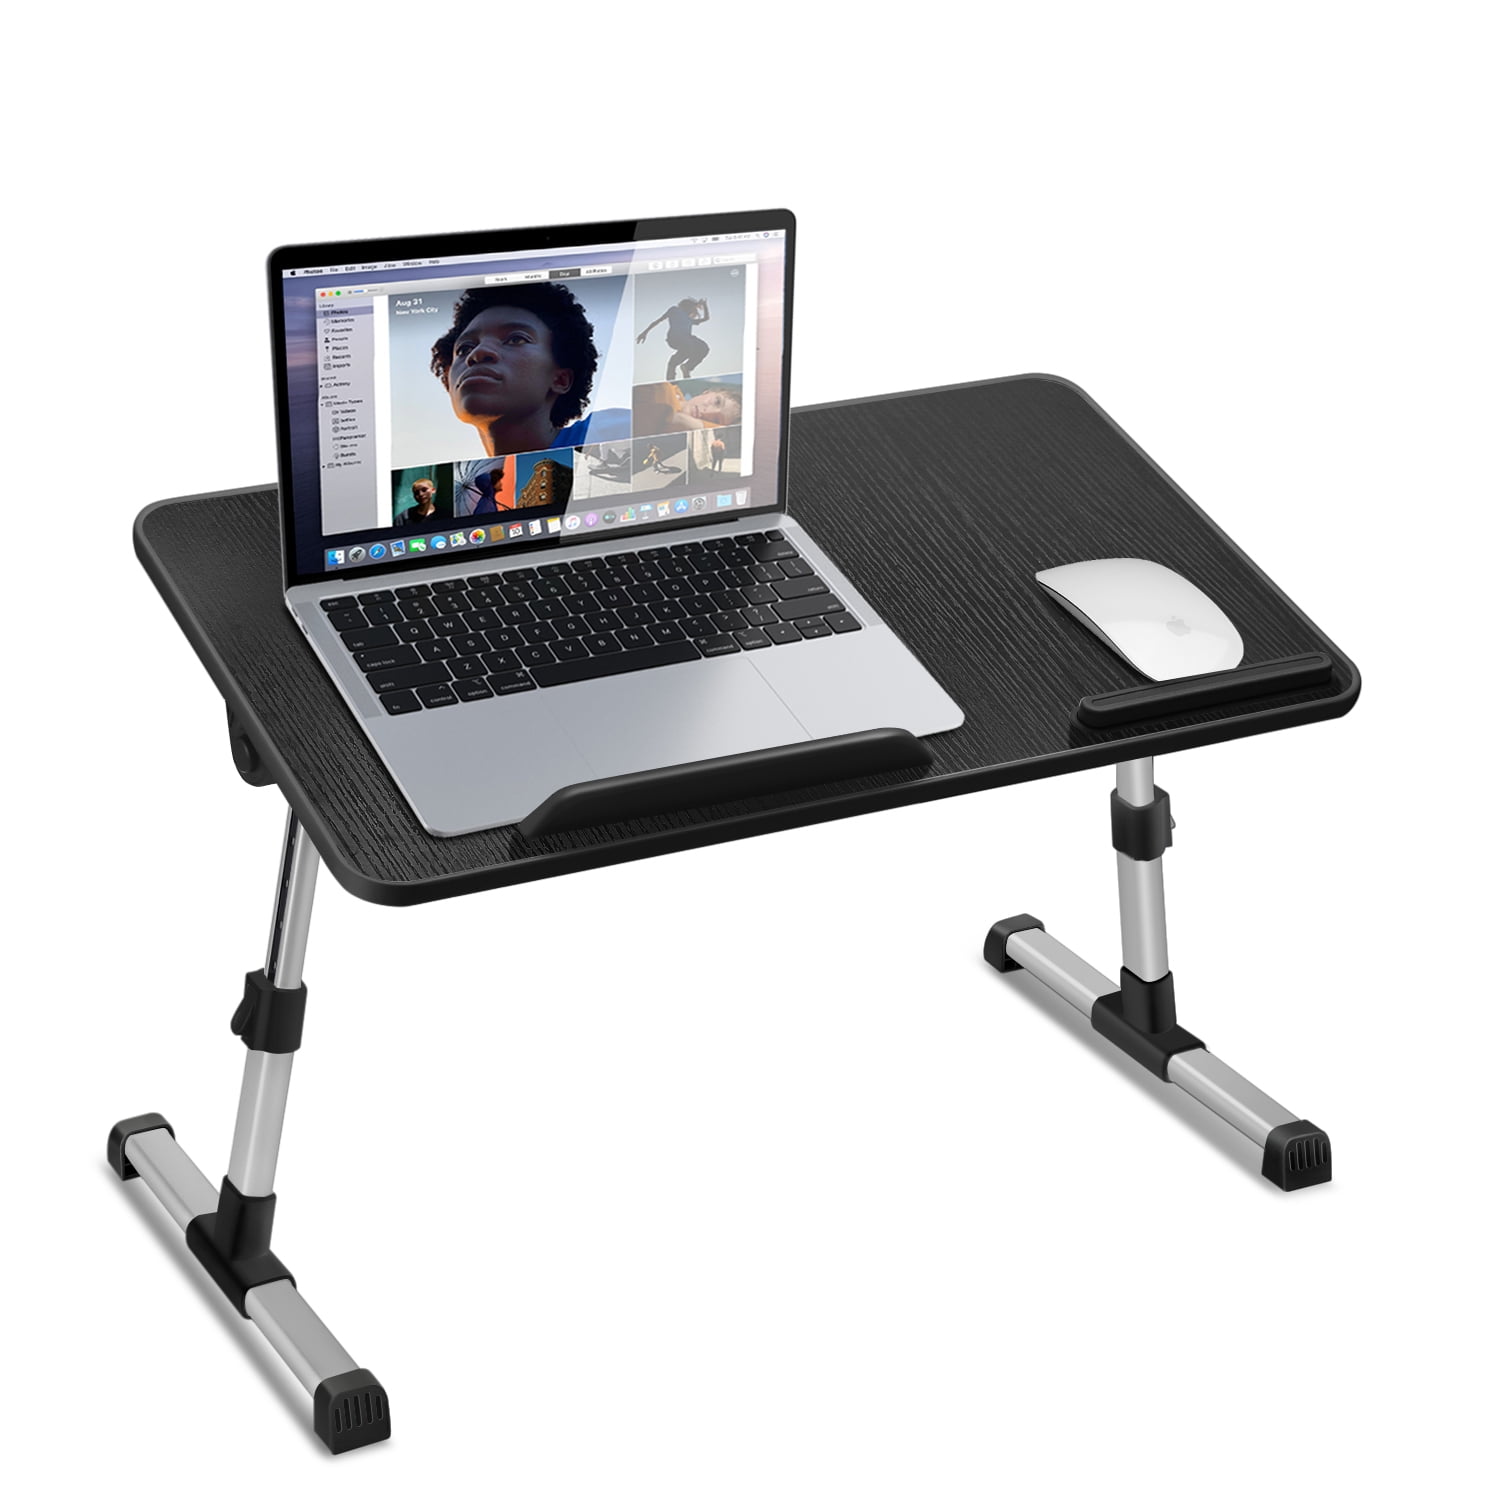 Portable Foldable Laptop Table Tray Stand Laptop Bed Desk Lap Desk for Bed  for Working Writing Reading Eating lapdesk on Low Sitting Floor (Black  Wire) : Buy Online at Best Price in KSA - Souq is now : Home